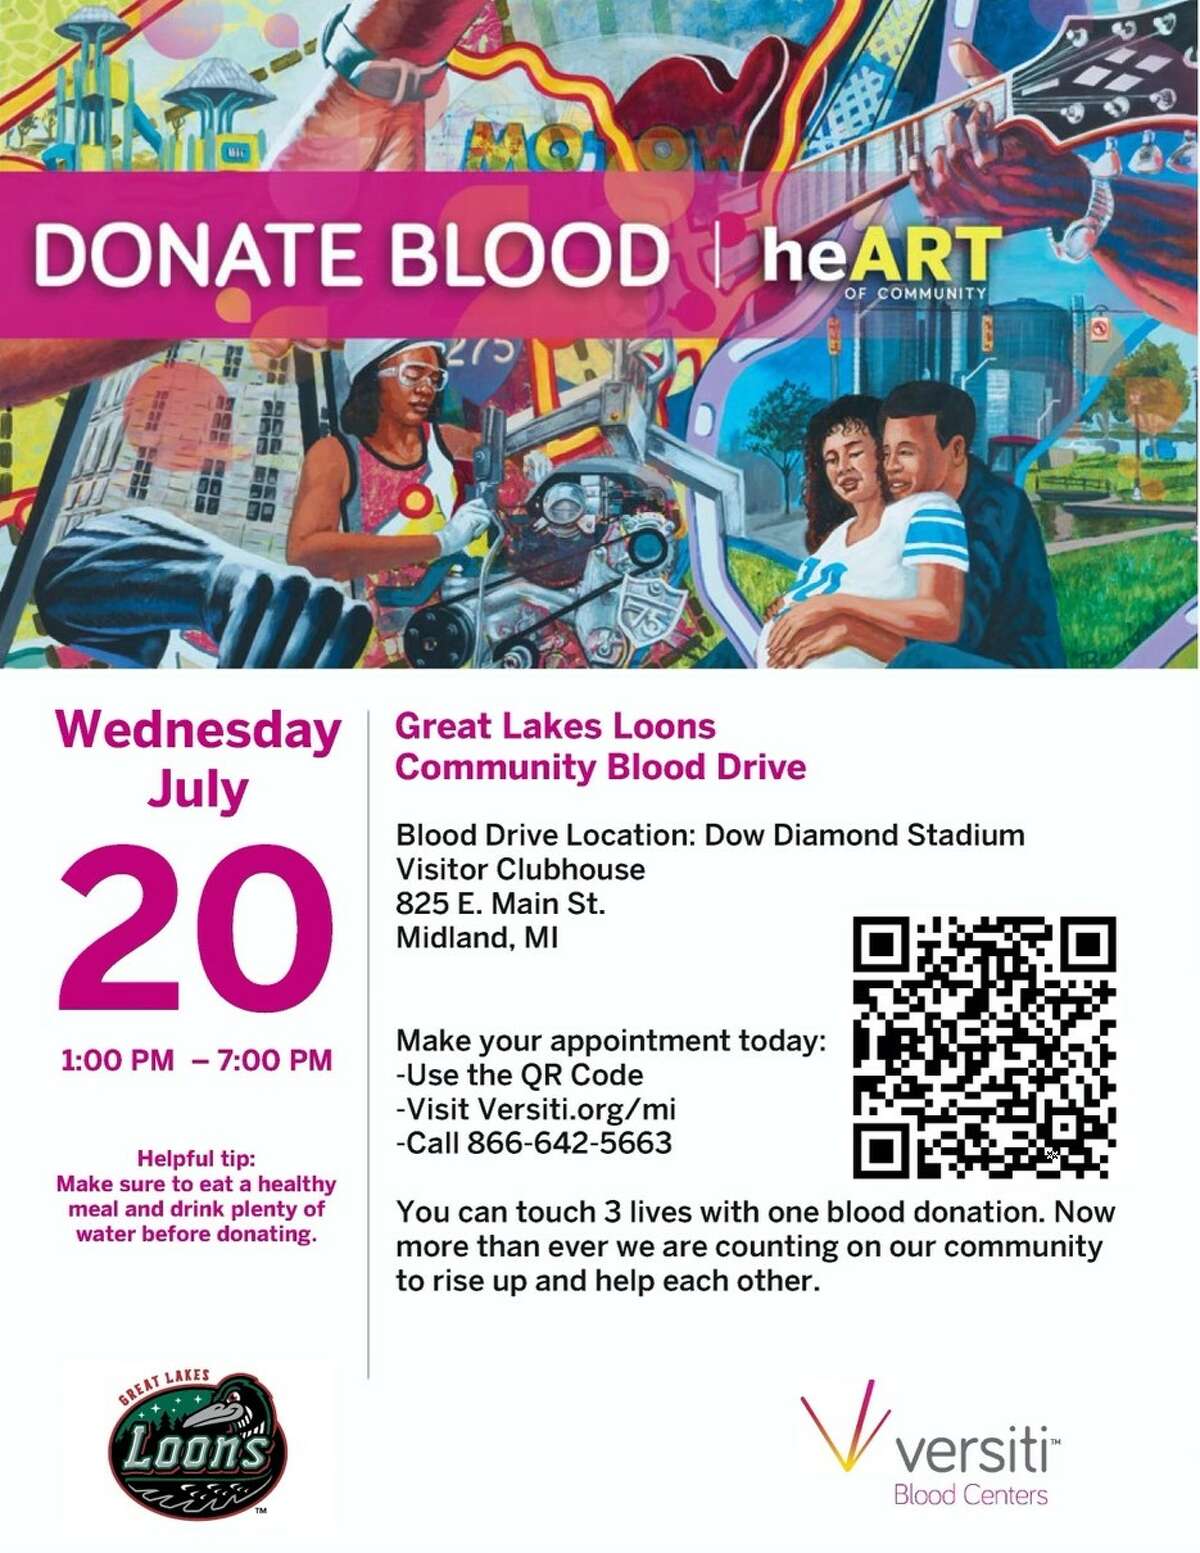 Scan the QR code to schedule an appointment to donate. 